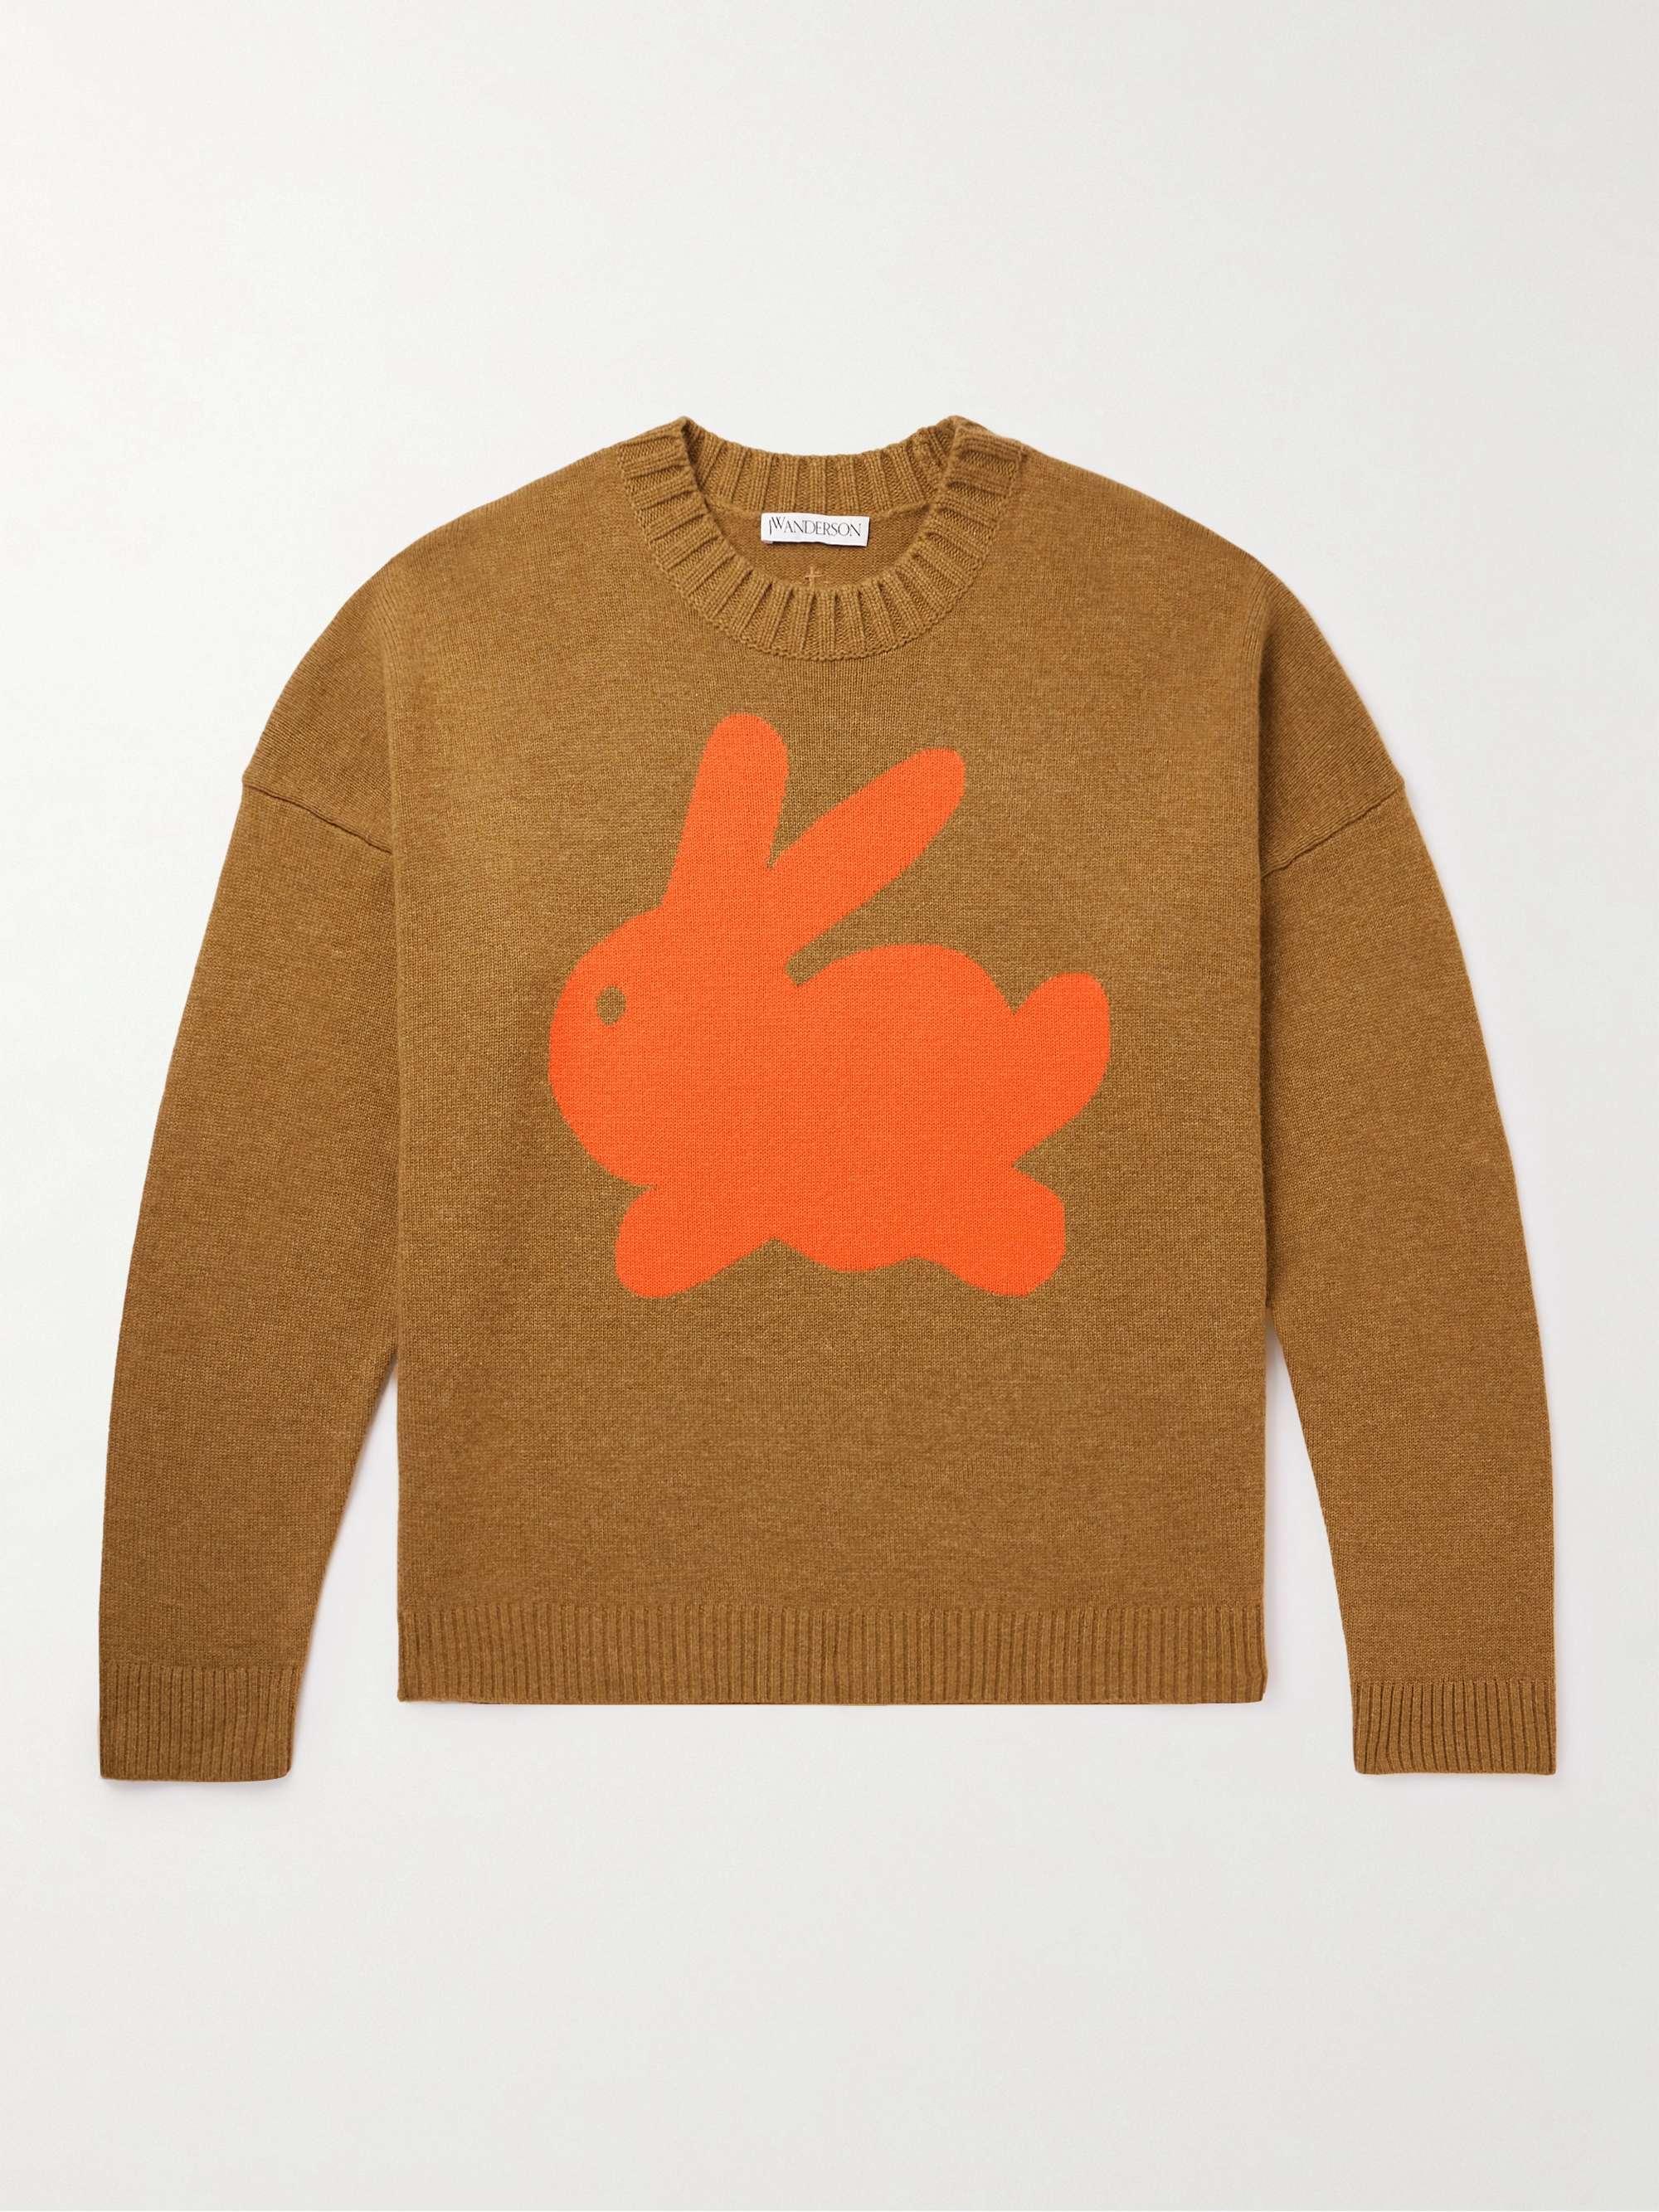 JW ANDERSON Intarsia-Knit Sweater for Men